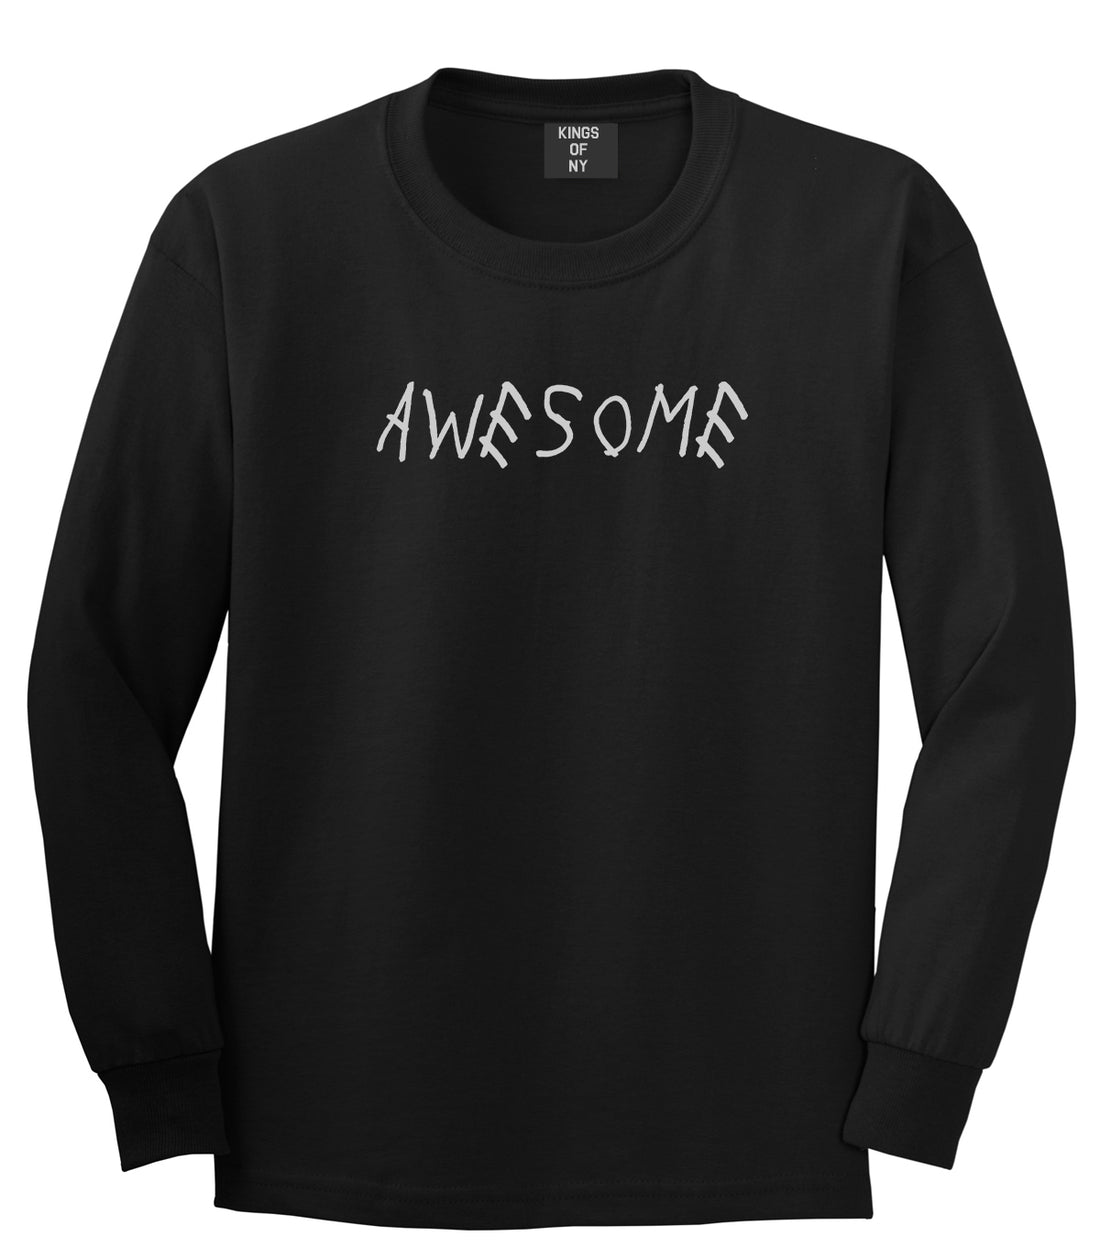 Awesome Black Long Sleeve T-Shirt by Kings Of NY